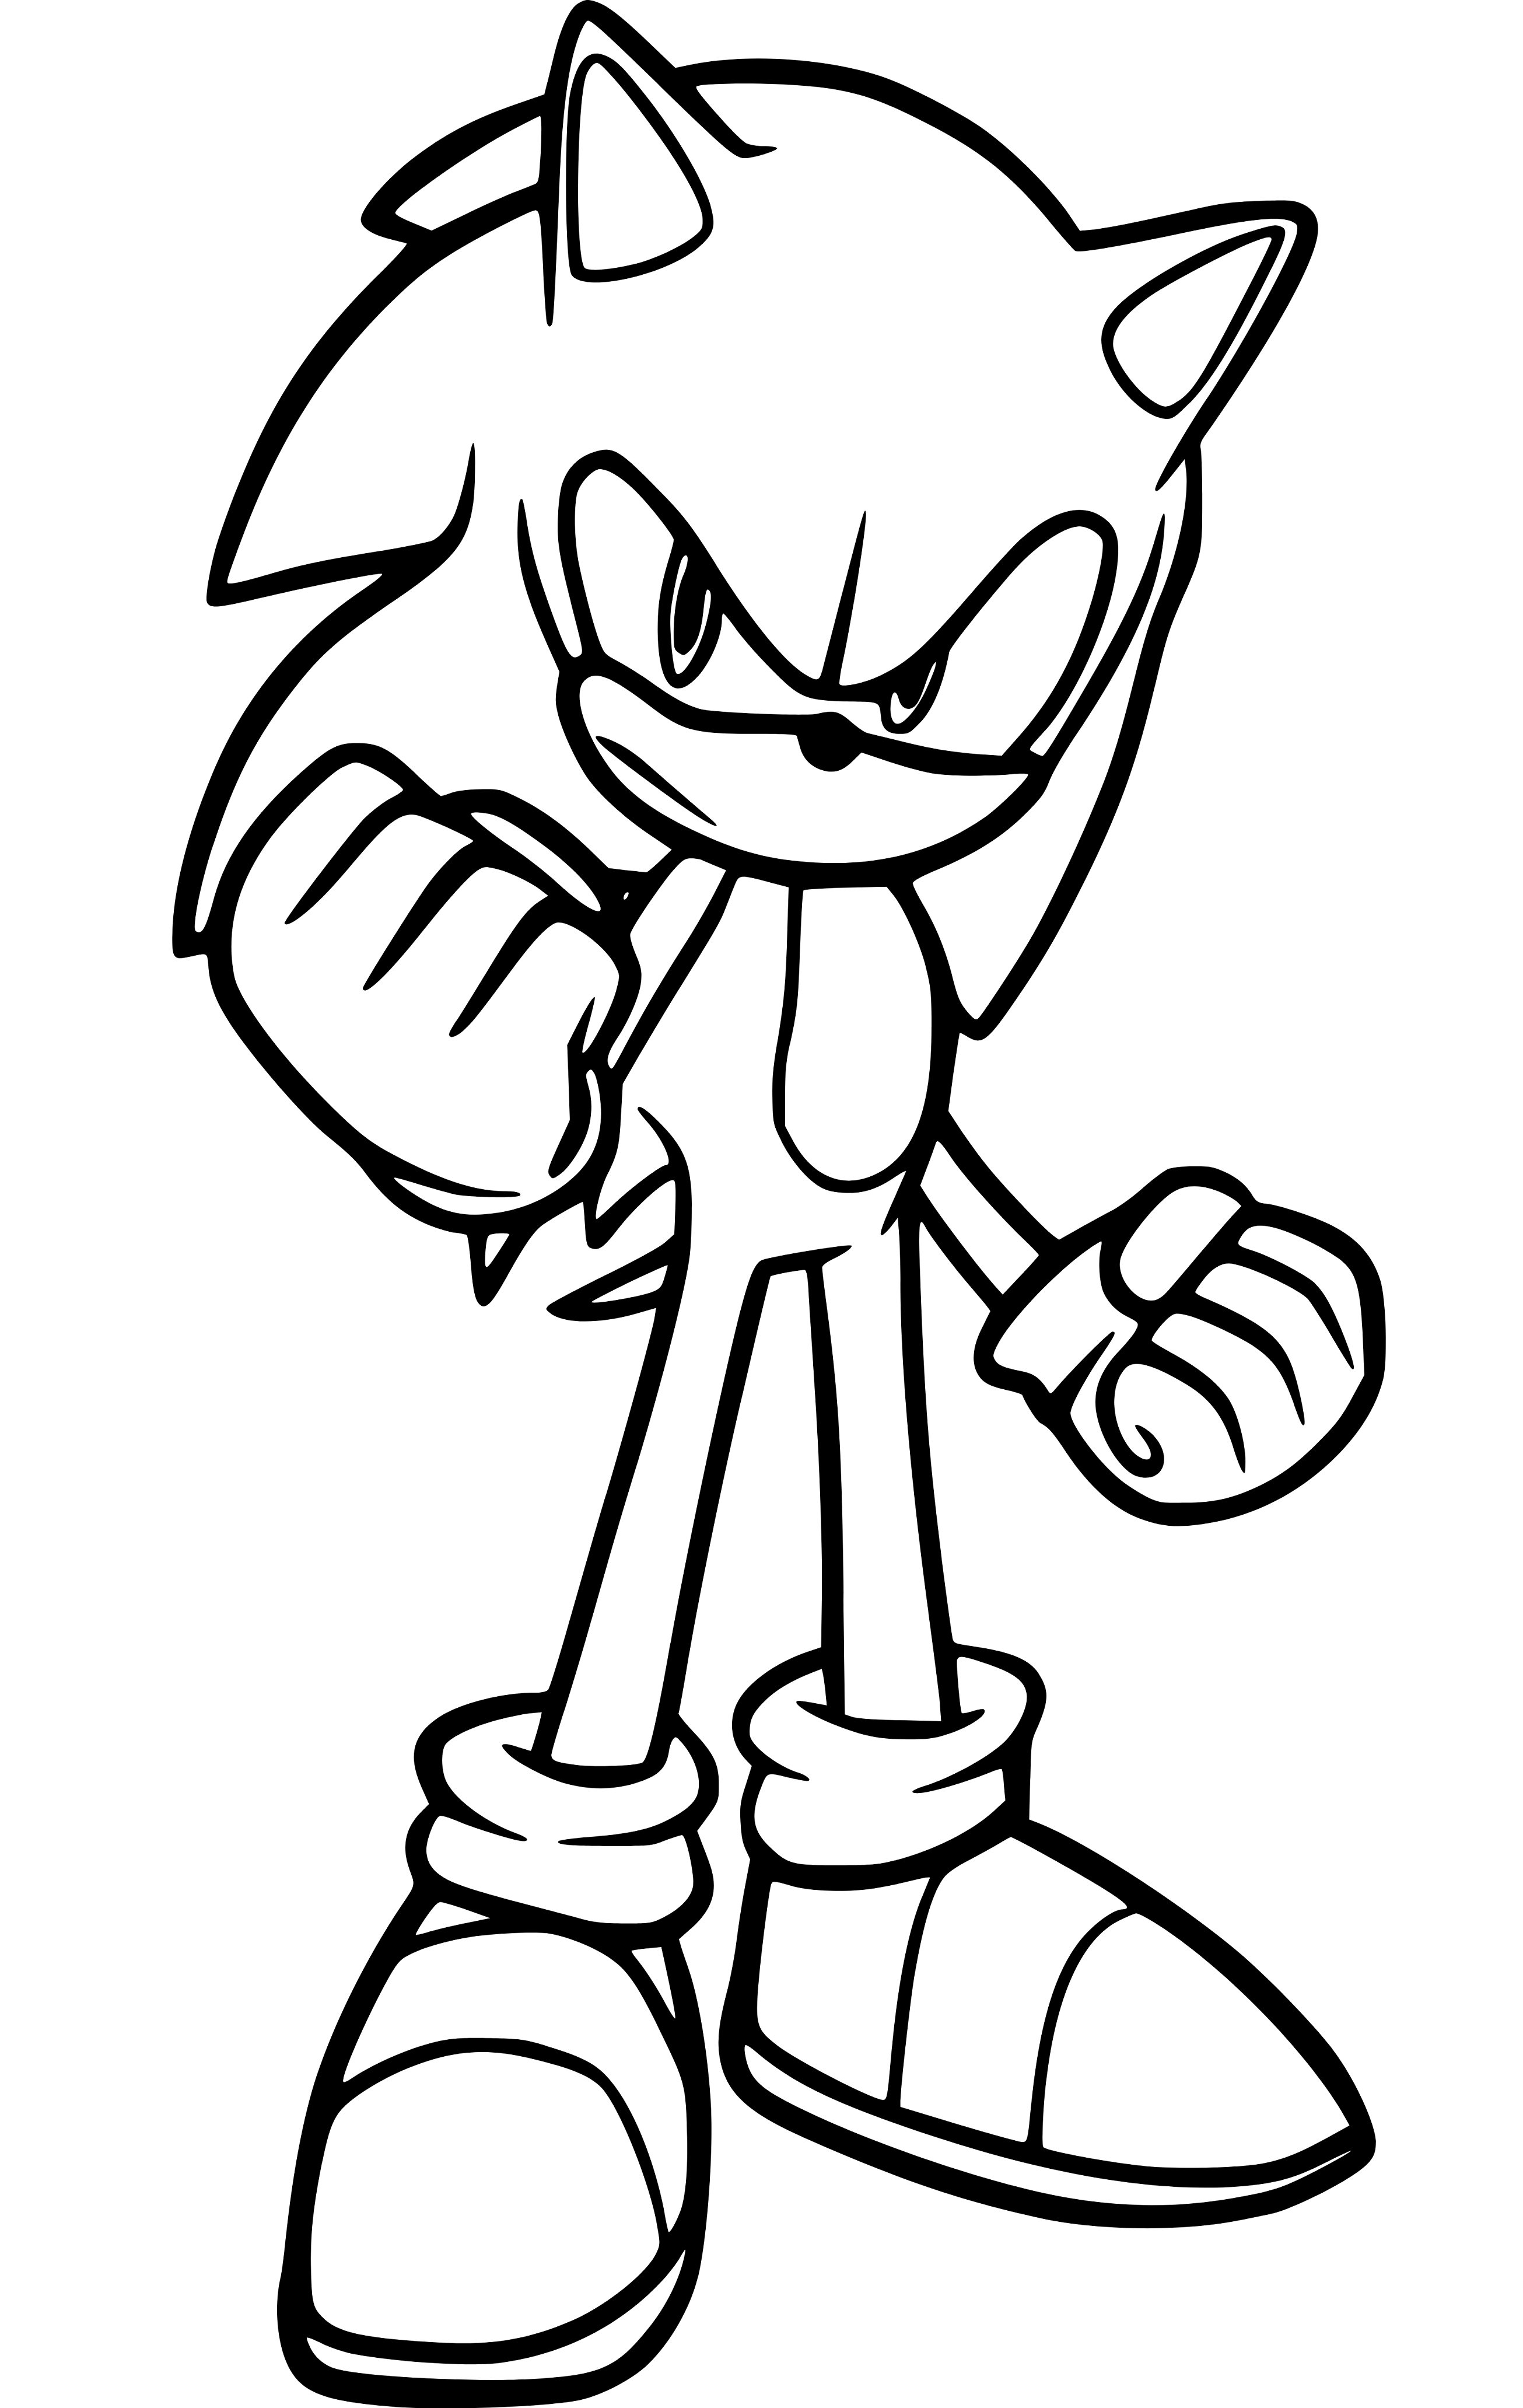 Printable Successful Sonic the Hedgehog Coloring Page for kids.